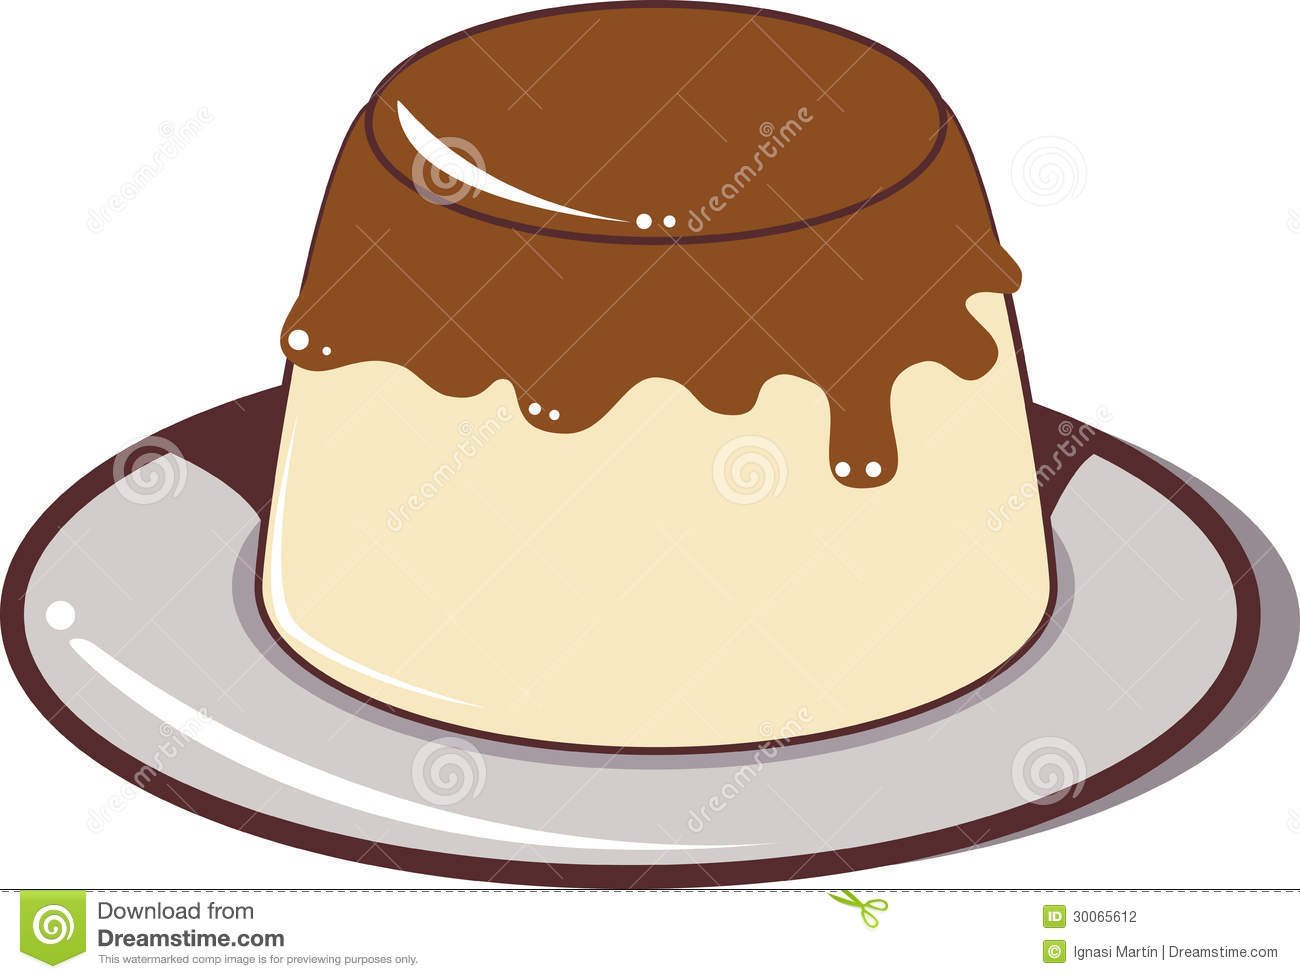 Pudding clipart 5 » Clipart Station.